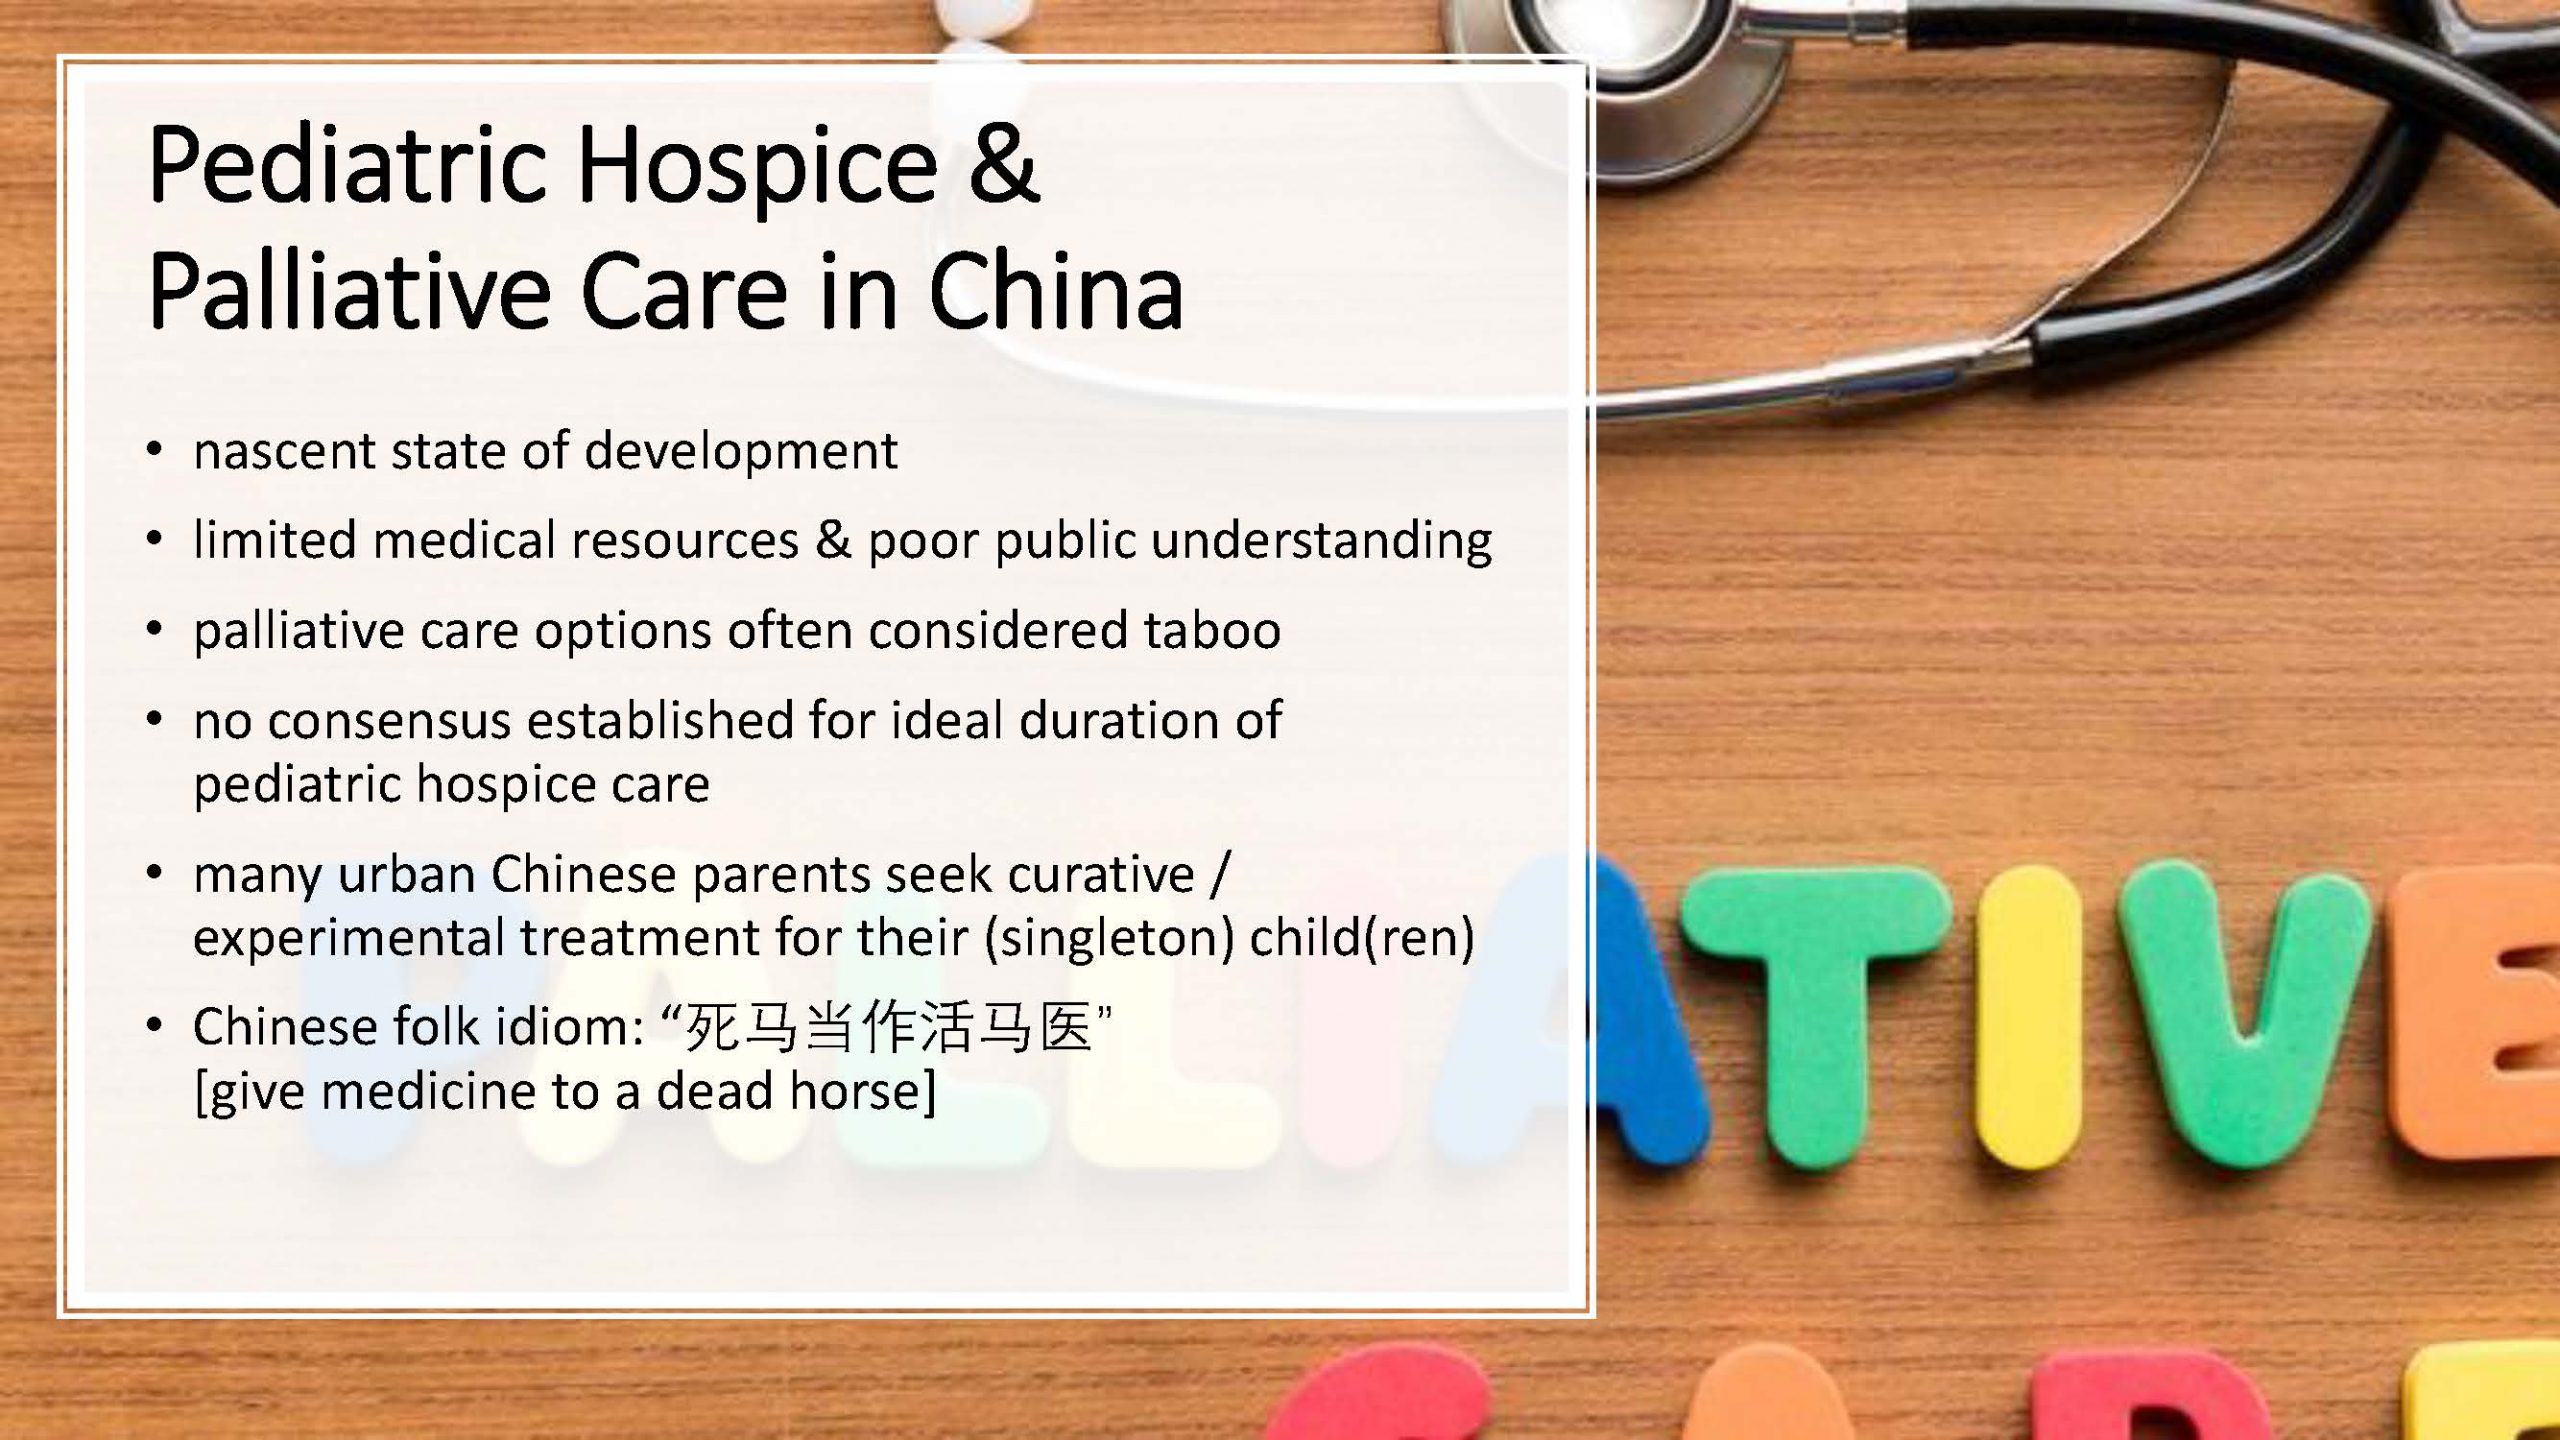 Tianyi Yan and Priscilla Song present on chronic dying